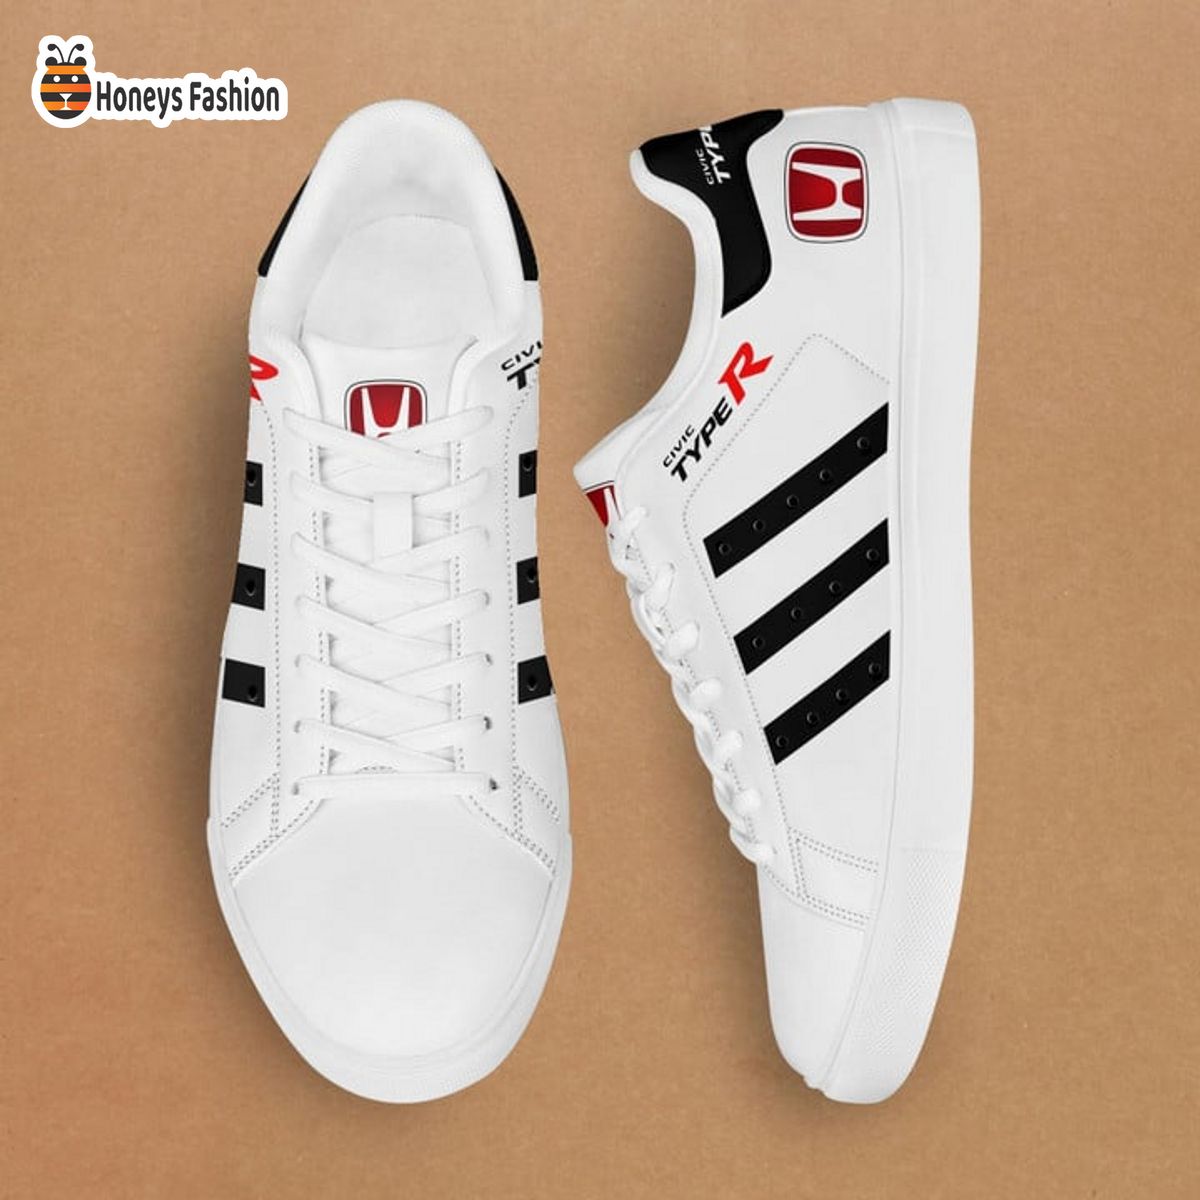 Honda Civic Type R White Stan Smith Low Top Shoes